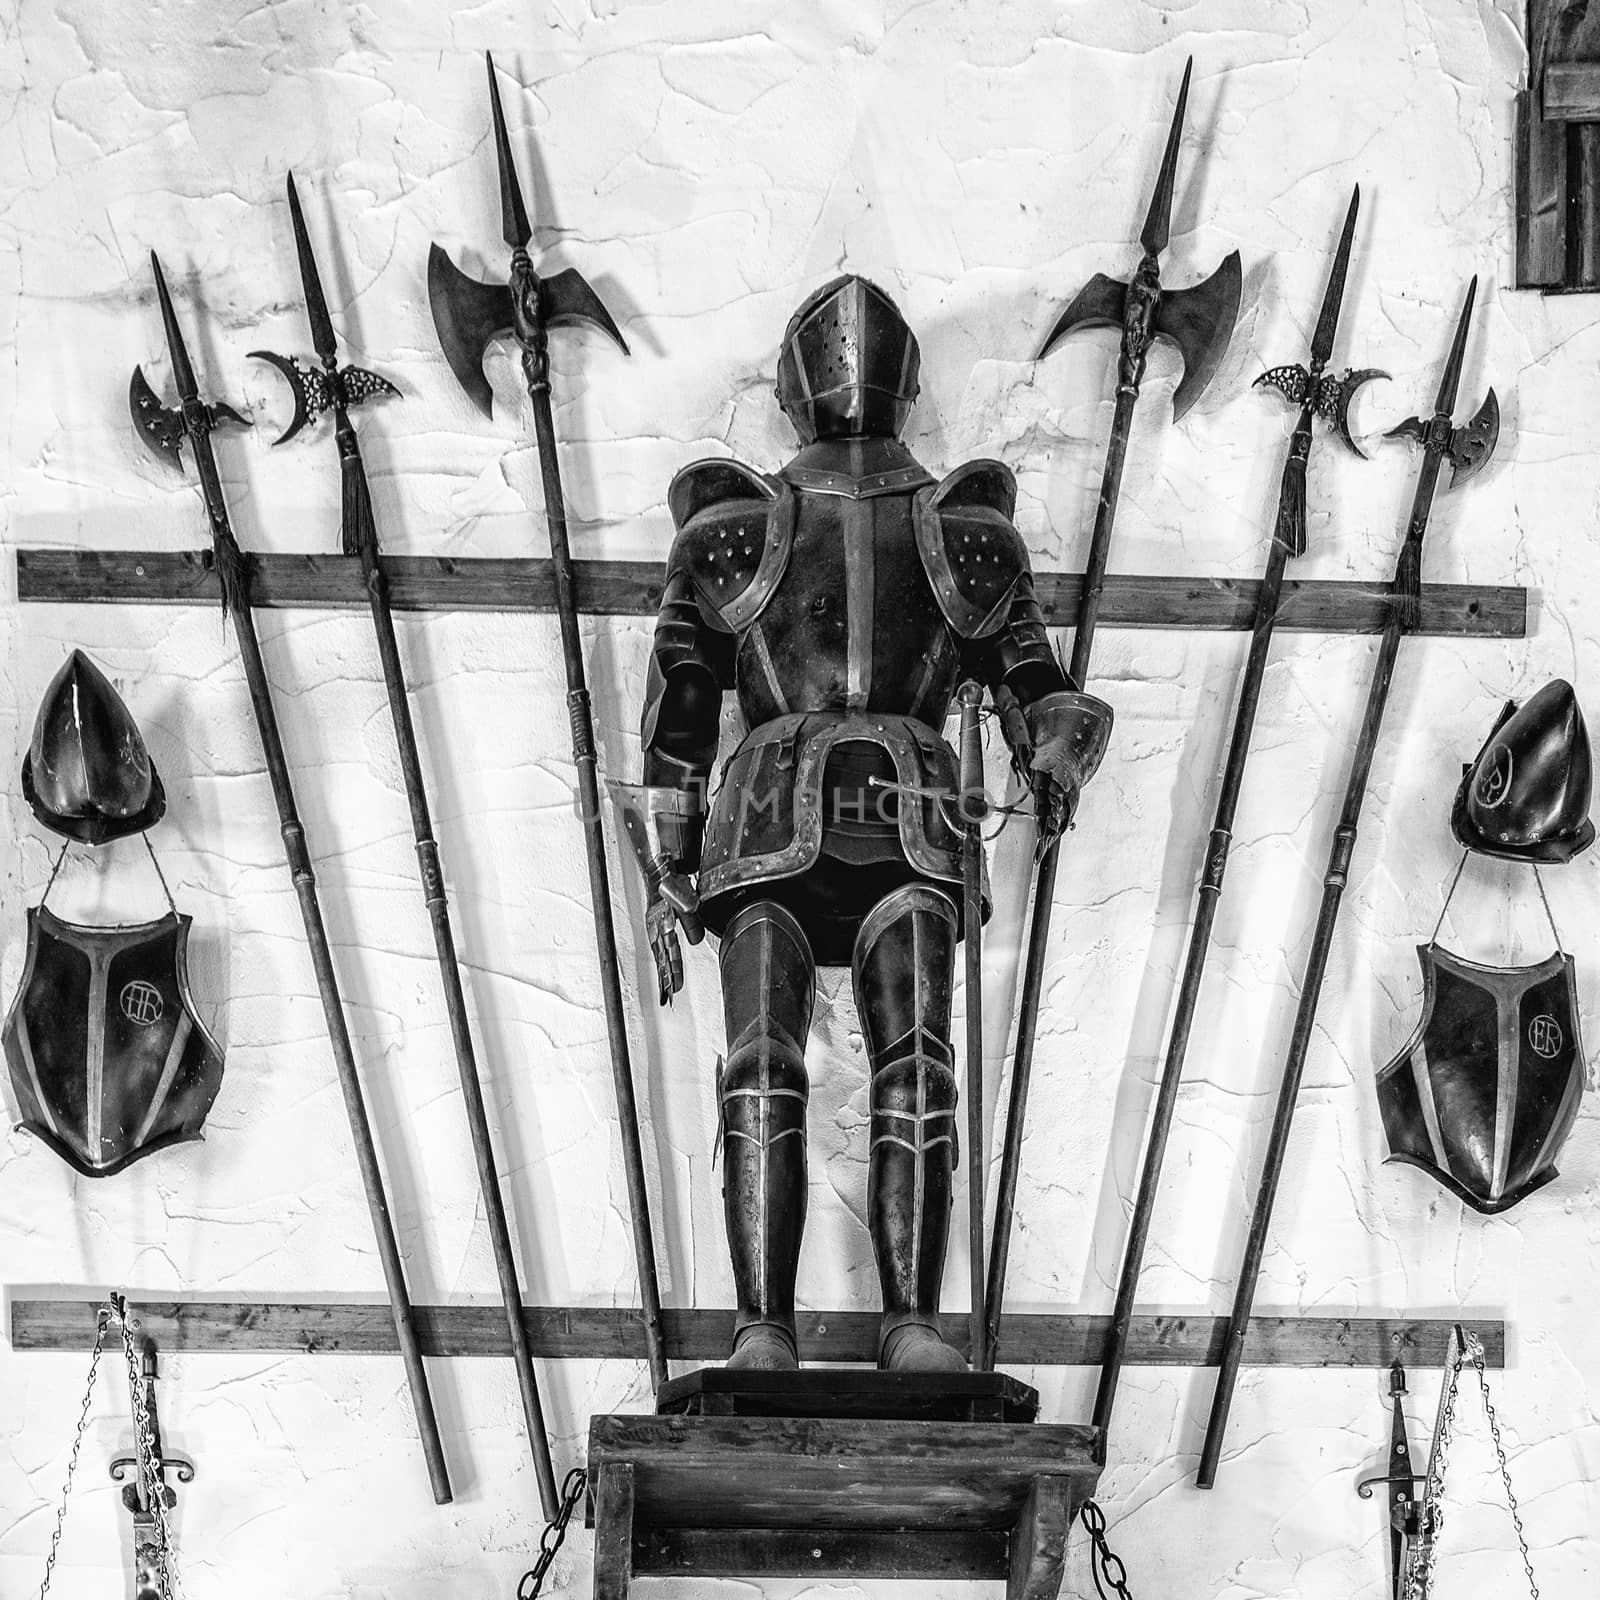 Medieval armor exposed along with metal halberds.